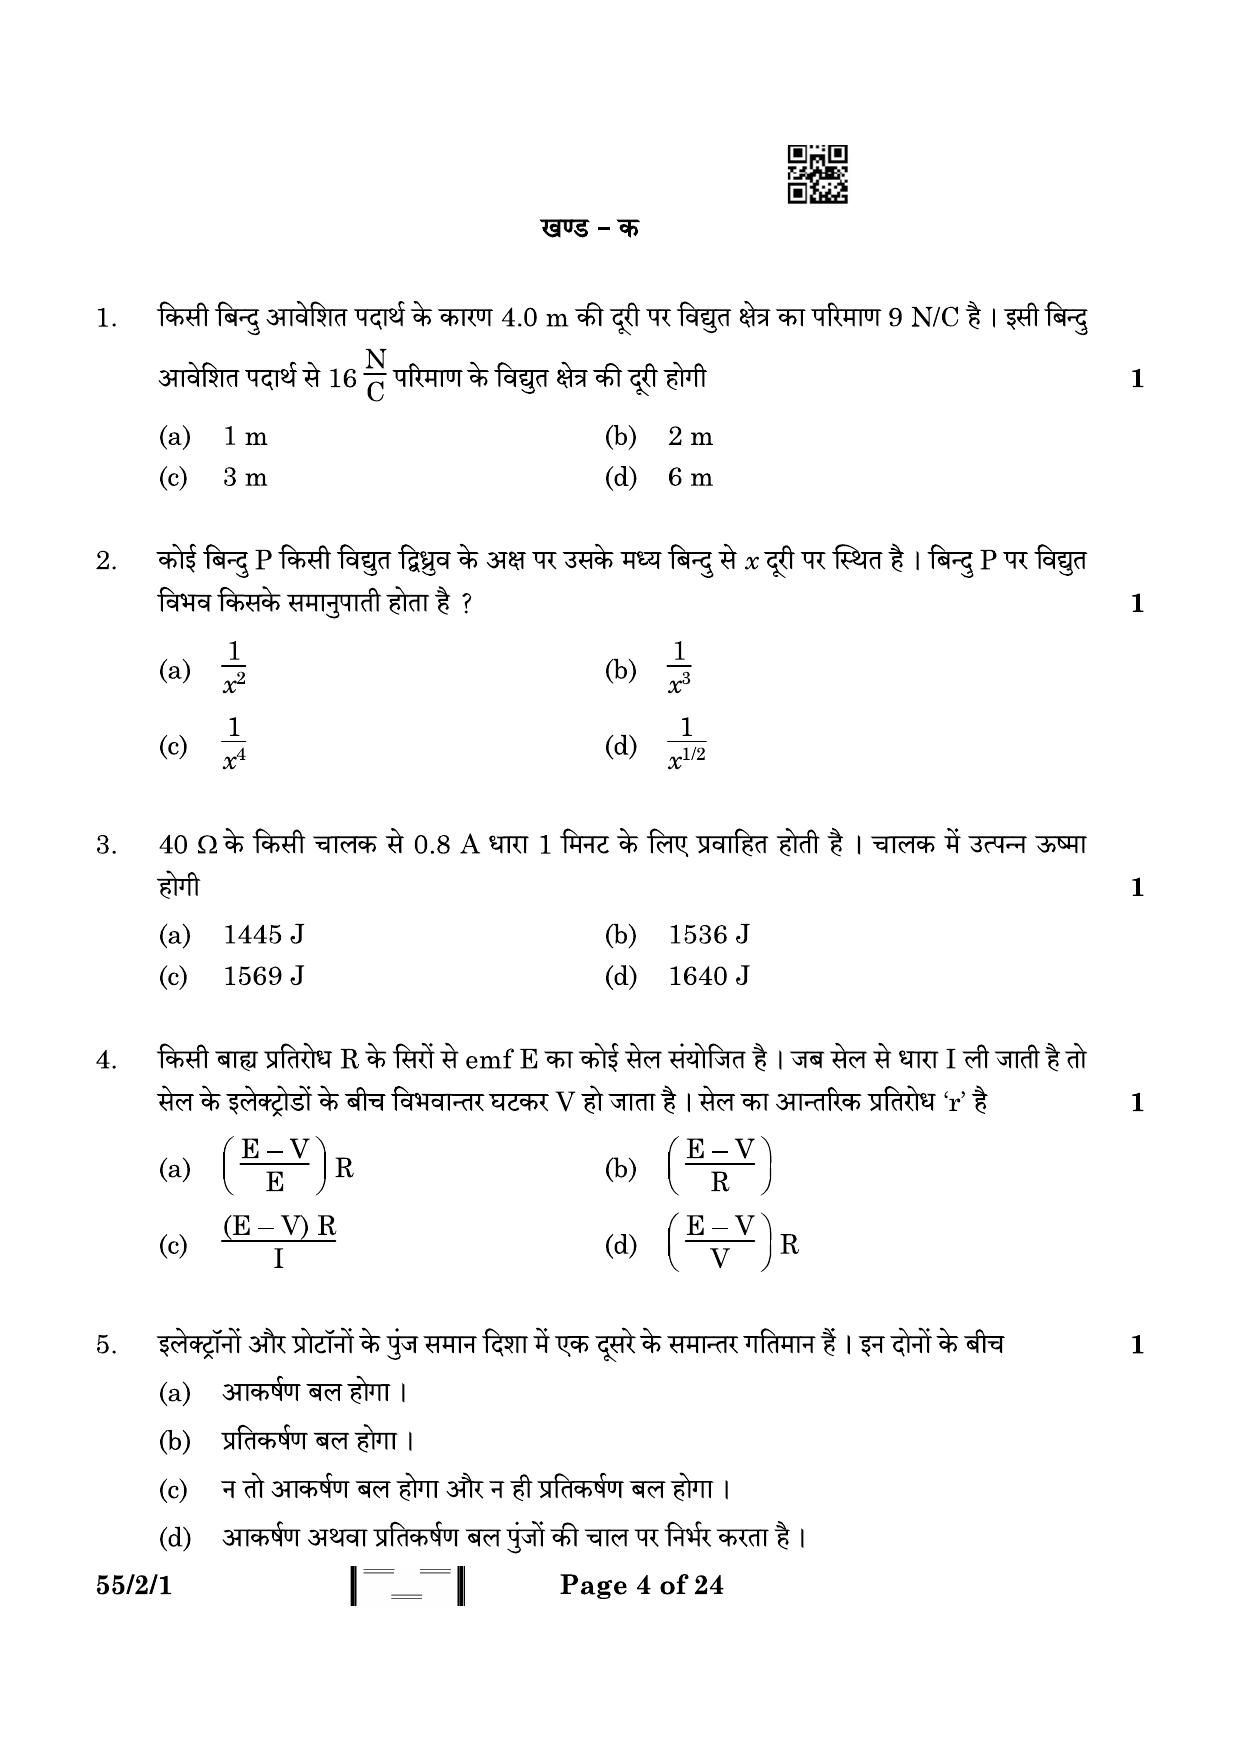 CBSE Class 12 55-2-1 Physics 2023 Question Paper - Page 4